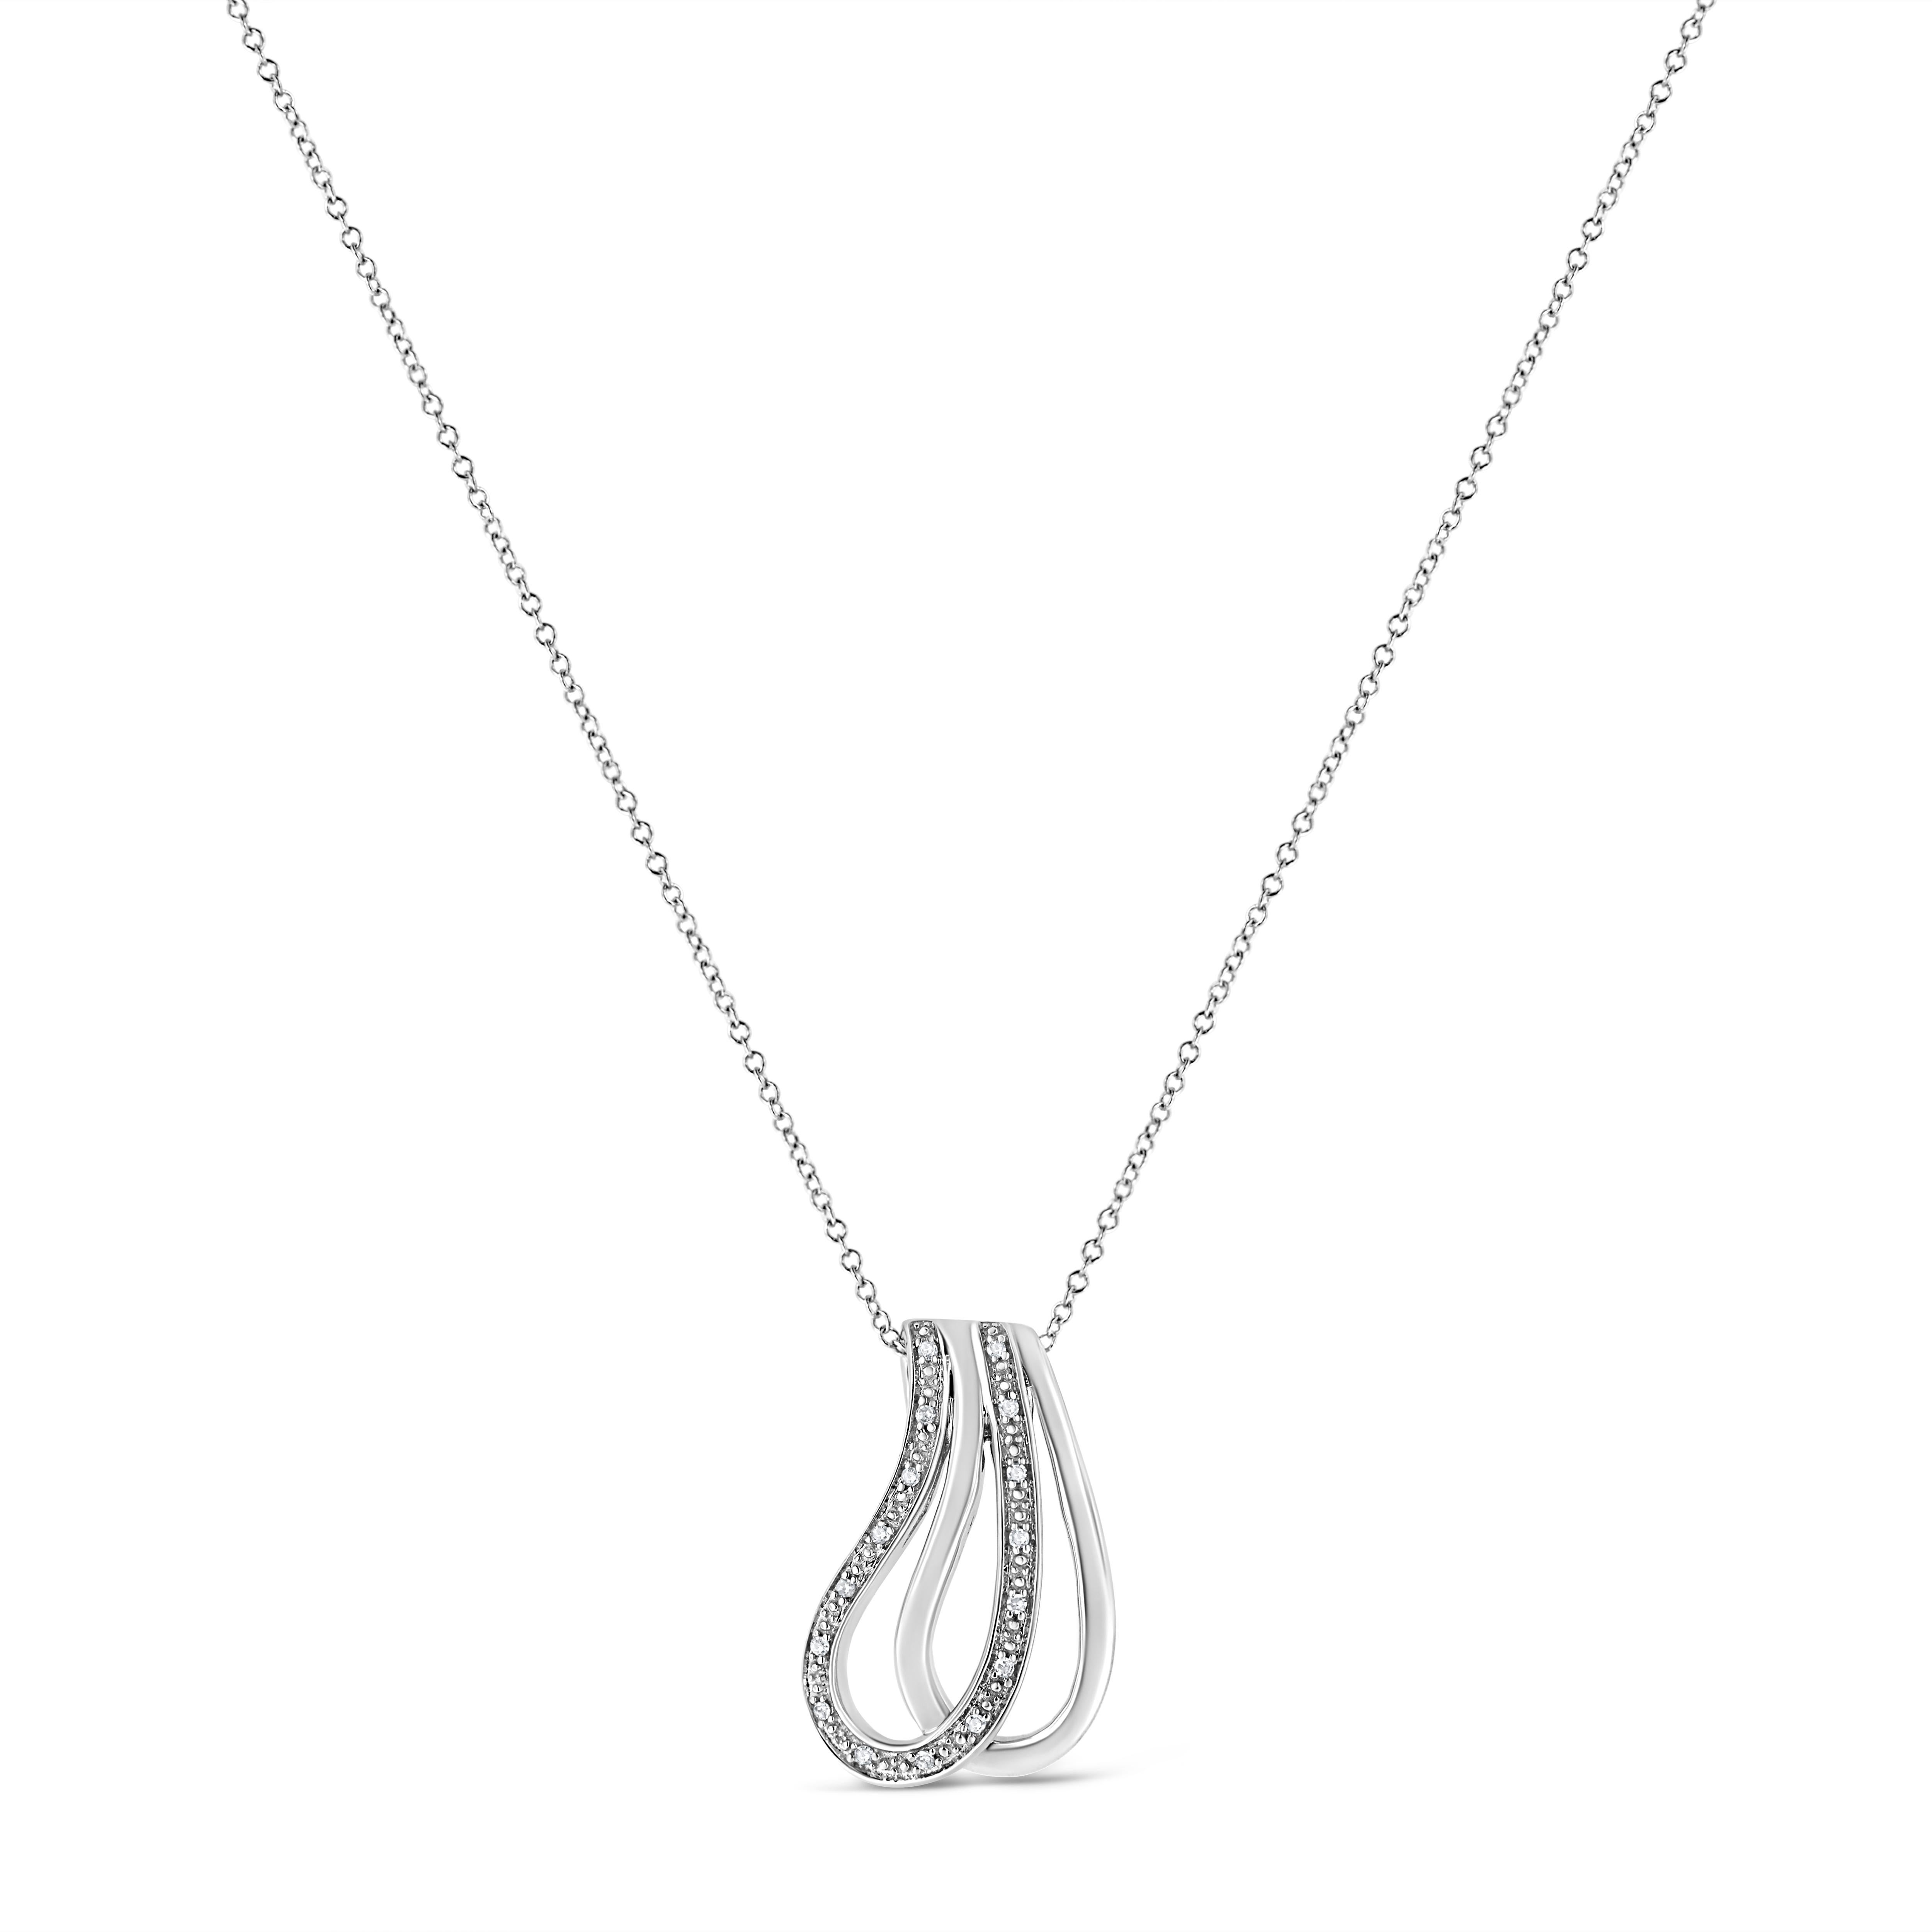 This exquisite diamond pendant will stun the onlookers. Fashioned in lustrous sterling silver this intricately designed pendant showcases two curved lines, one smooth sterling silver and the other sterling silver studded with 16 pave set single cut